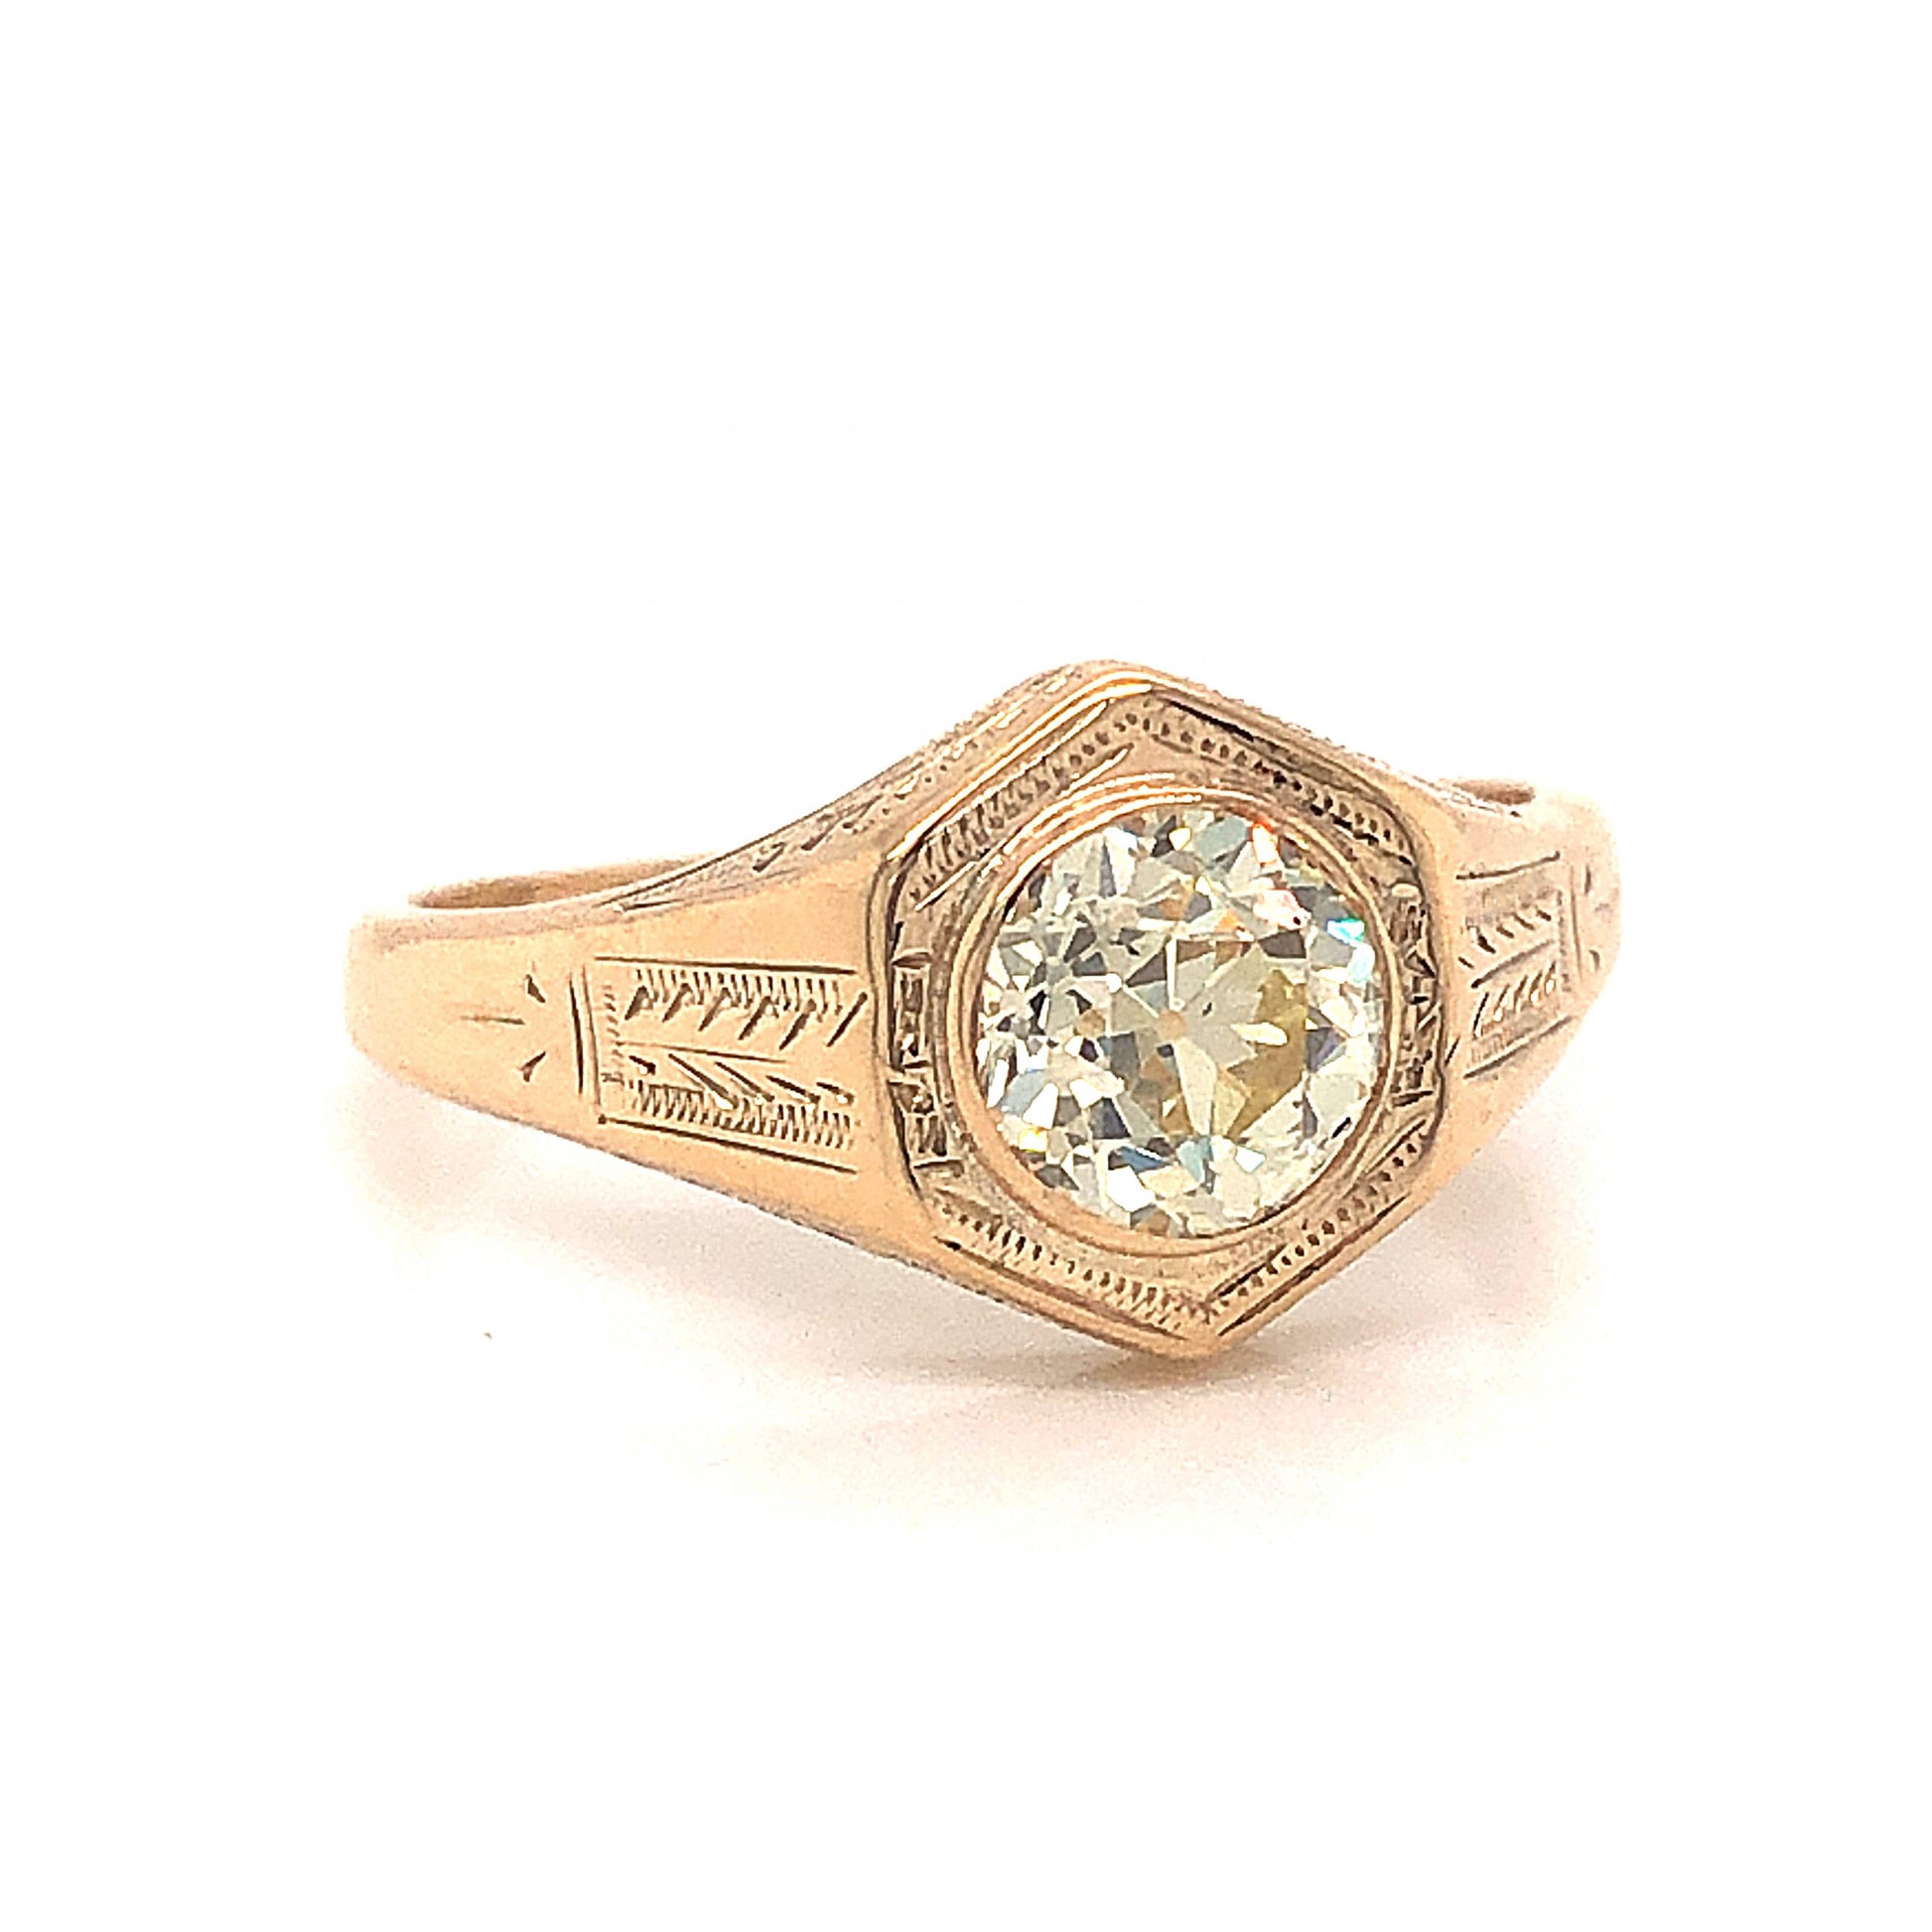 Engraved Victorian Diamond Engagement Ring in 10k Yellow GoldComposition: 10 Karat Yellow Gold Ring Size: 6.5 Total Diamond Weight: .87ct Total Gram Weight: 1.6 g Inscription: 10k
      